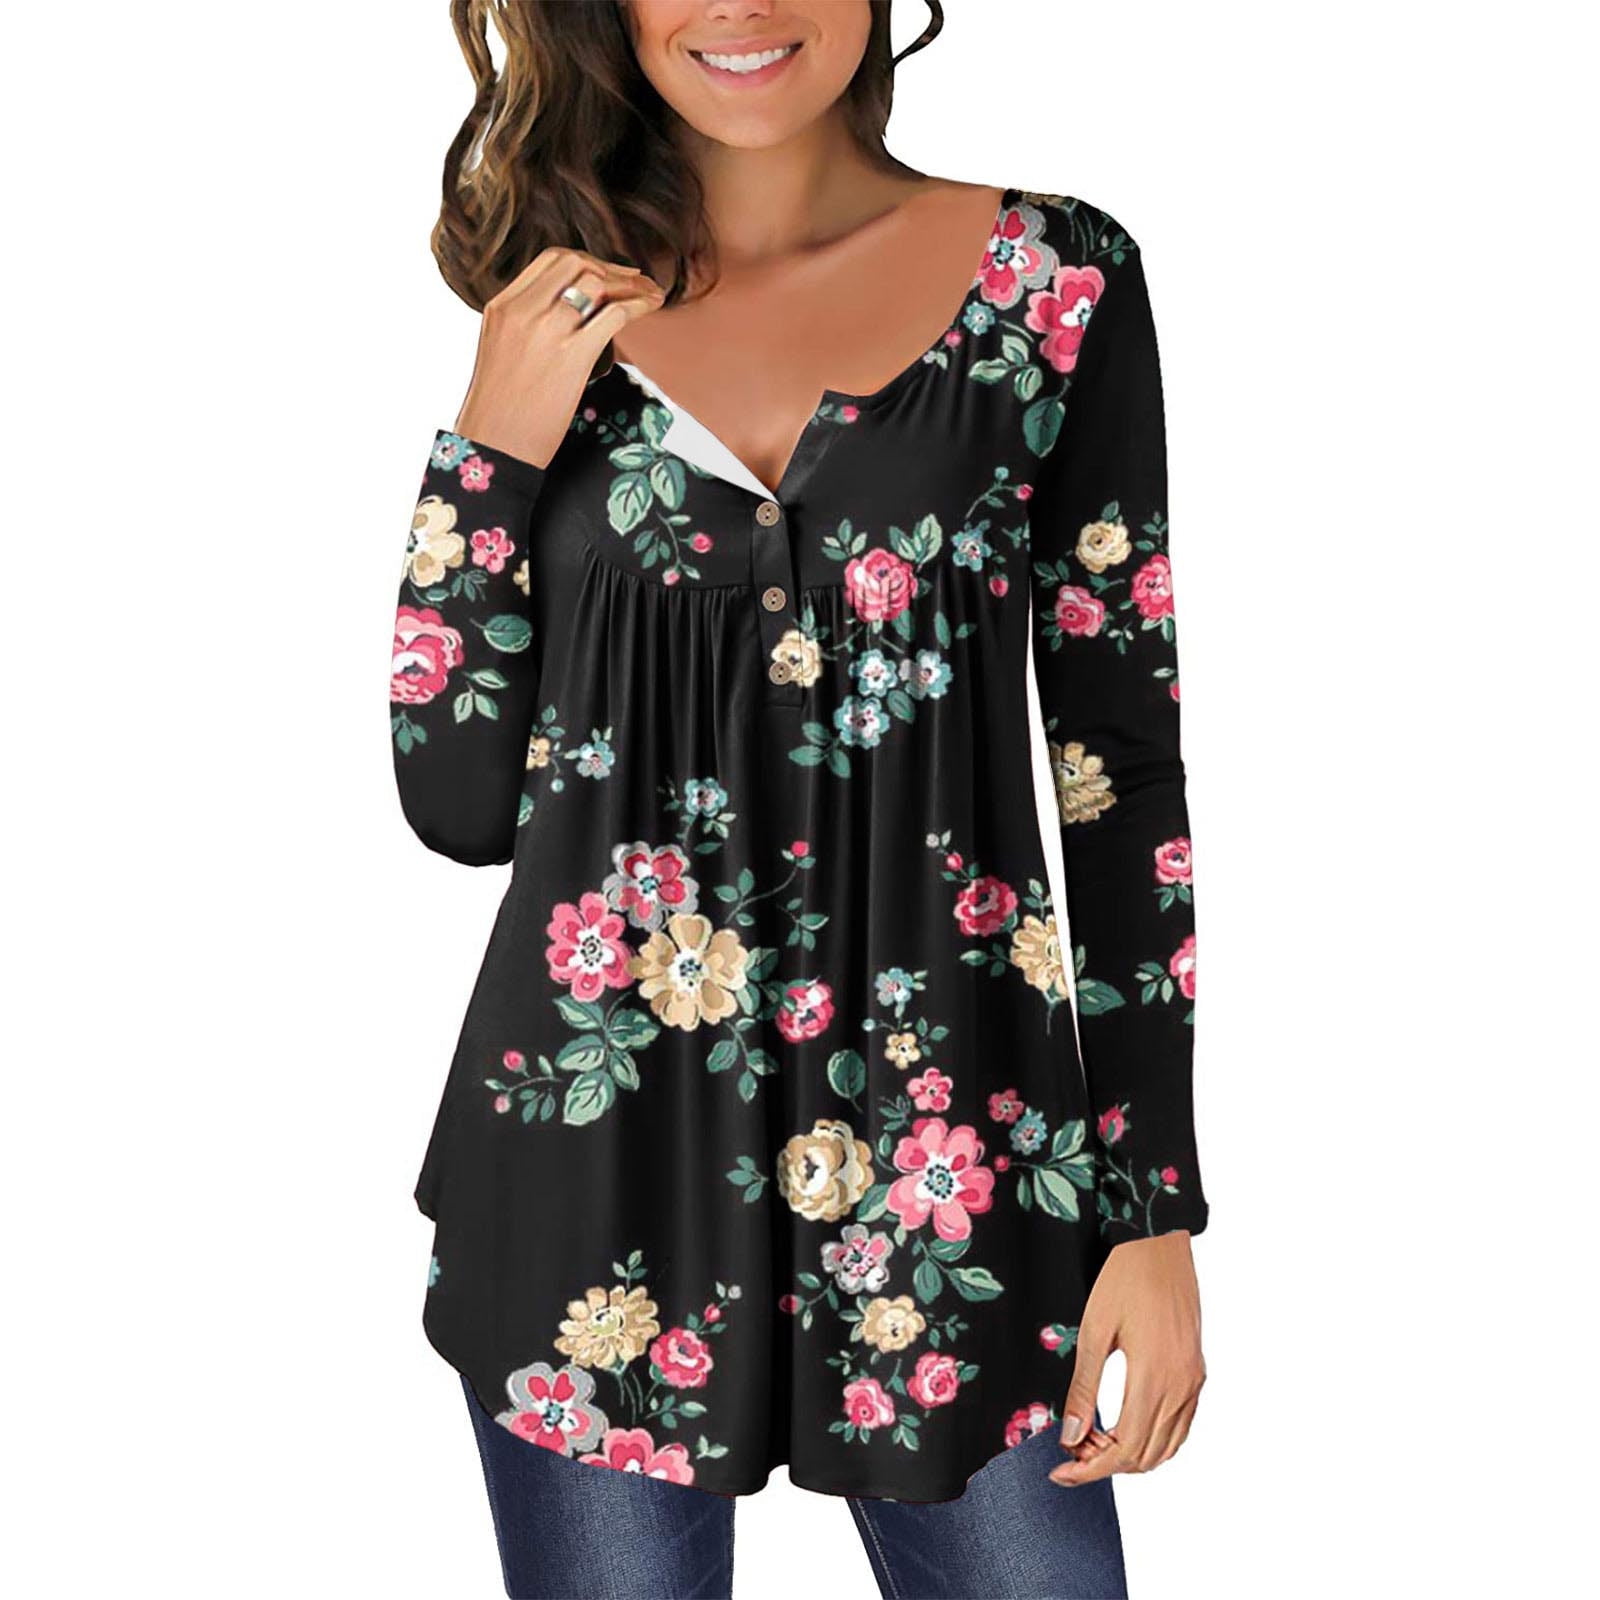 Tunic Tops to Wear with Leggings Dressy Plus Size Tops for Women